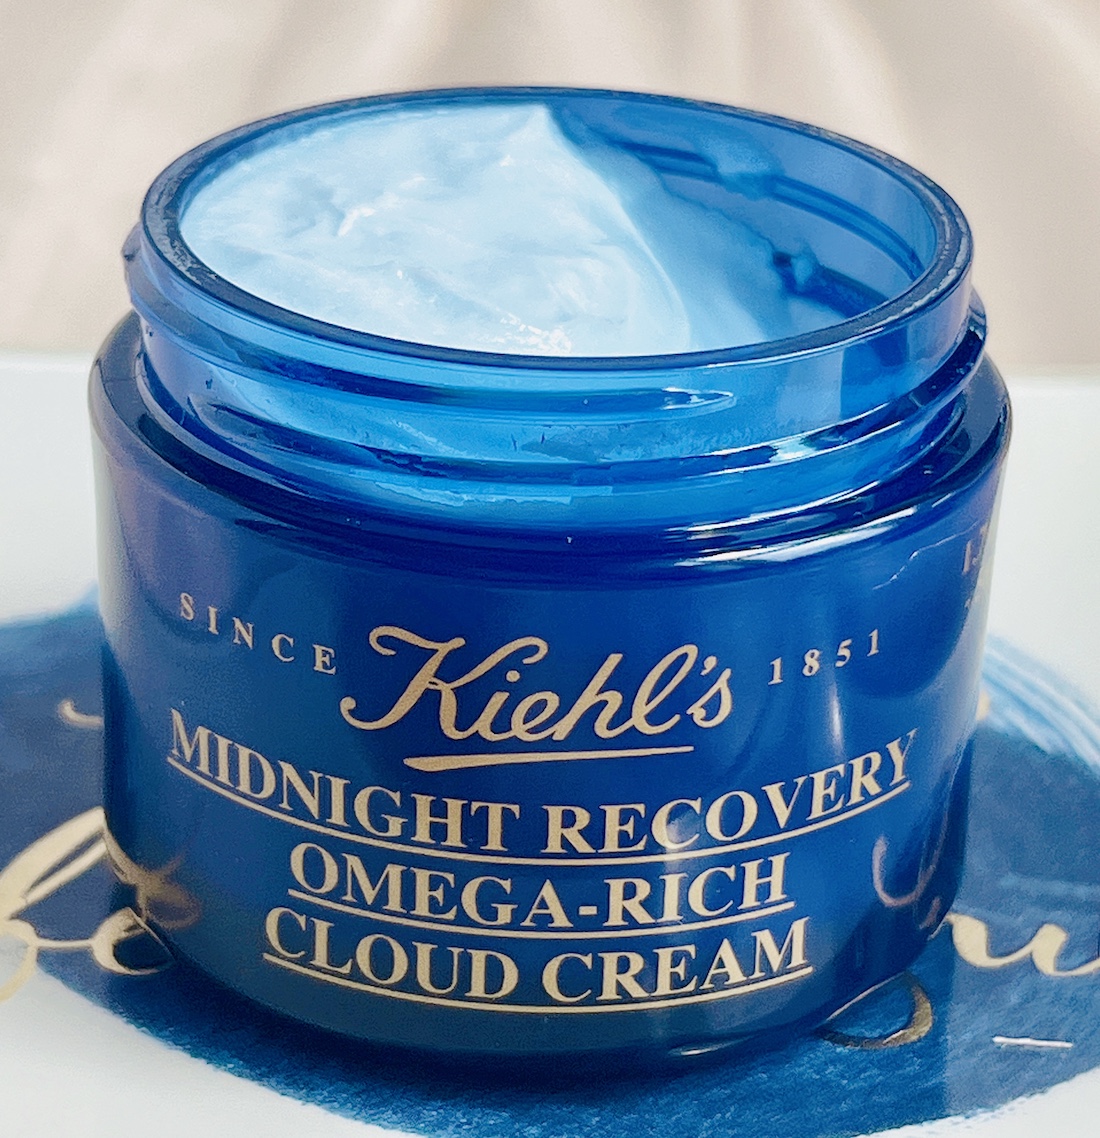 Kiehl’s Midnight Recovery Omega Rich Cloud Cream